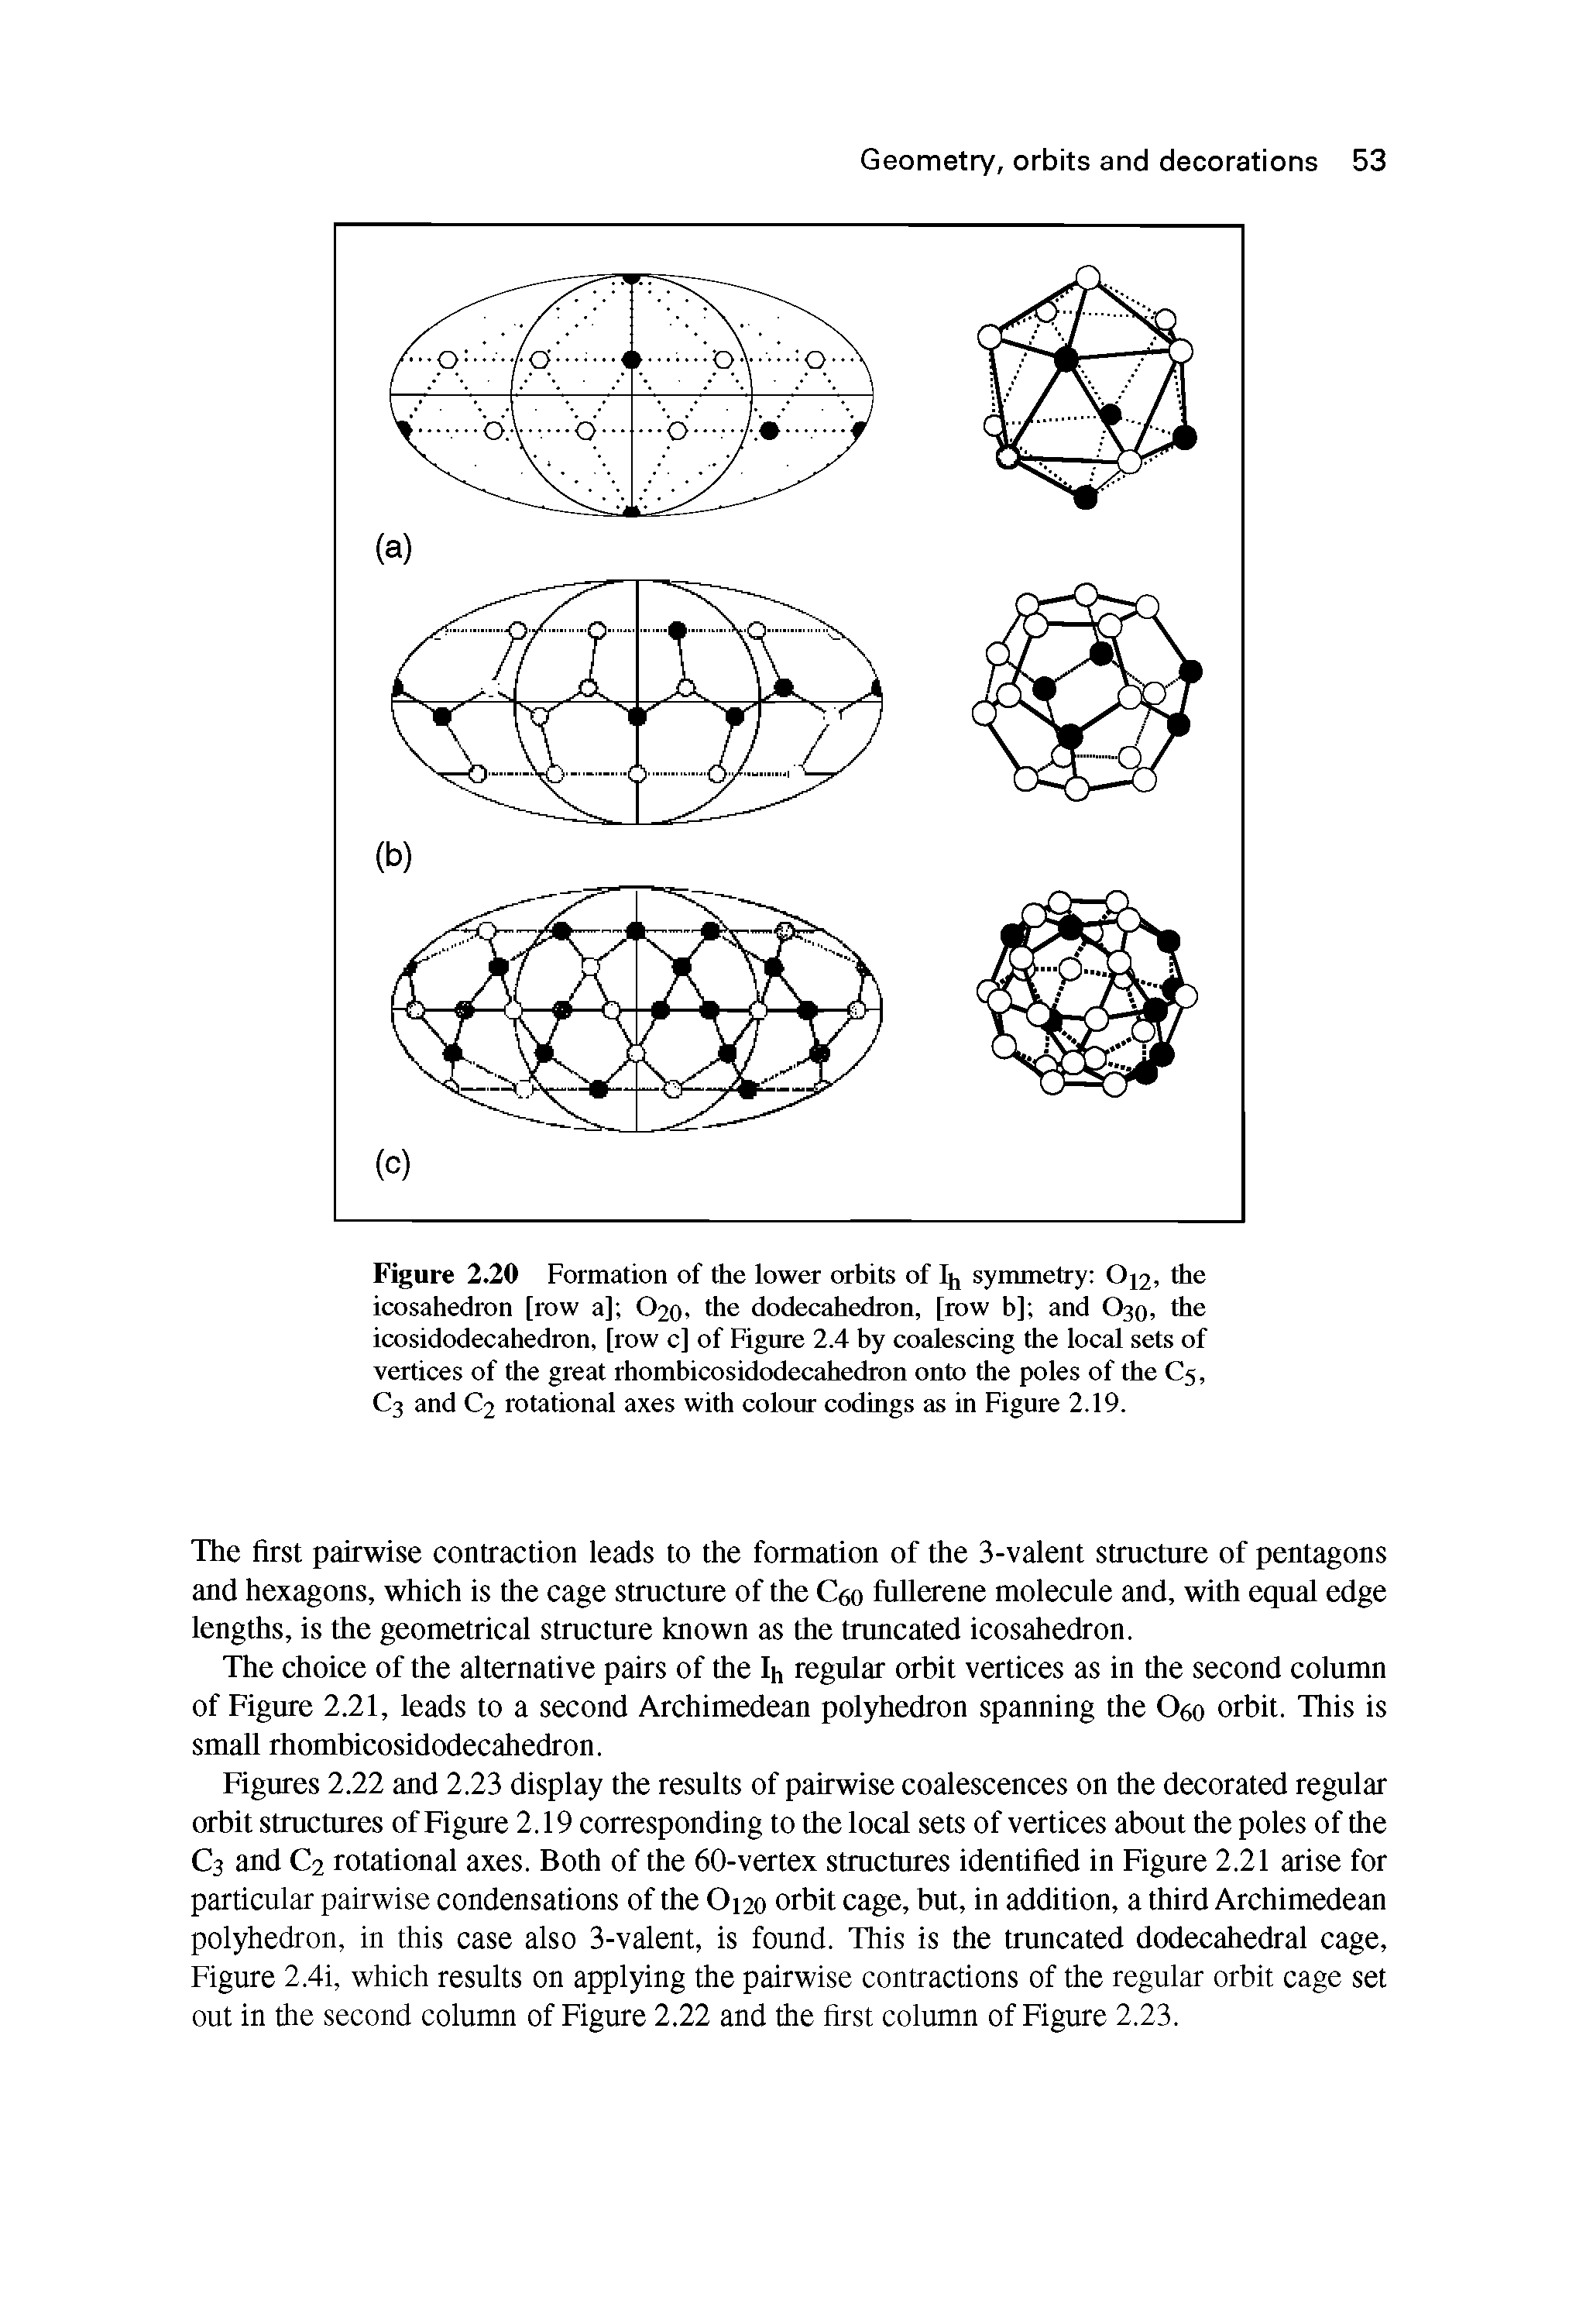 Figure 2.20 Formation of the lower orbits of Iji symmetry O12, the icosahedron [row a] O20, the dodecahedron, [row b] and O30, the icosidodecahedron, [row c] of Figure 2.4 by coalescing the local sets of vertices of the great rhombicosidodecahedron onto the poles of the C5, C3 and C2 rotational axes with colour codings as in Figure 2.19.